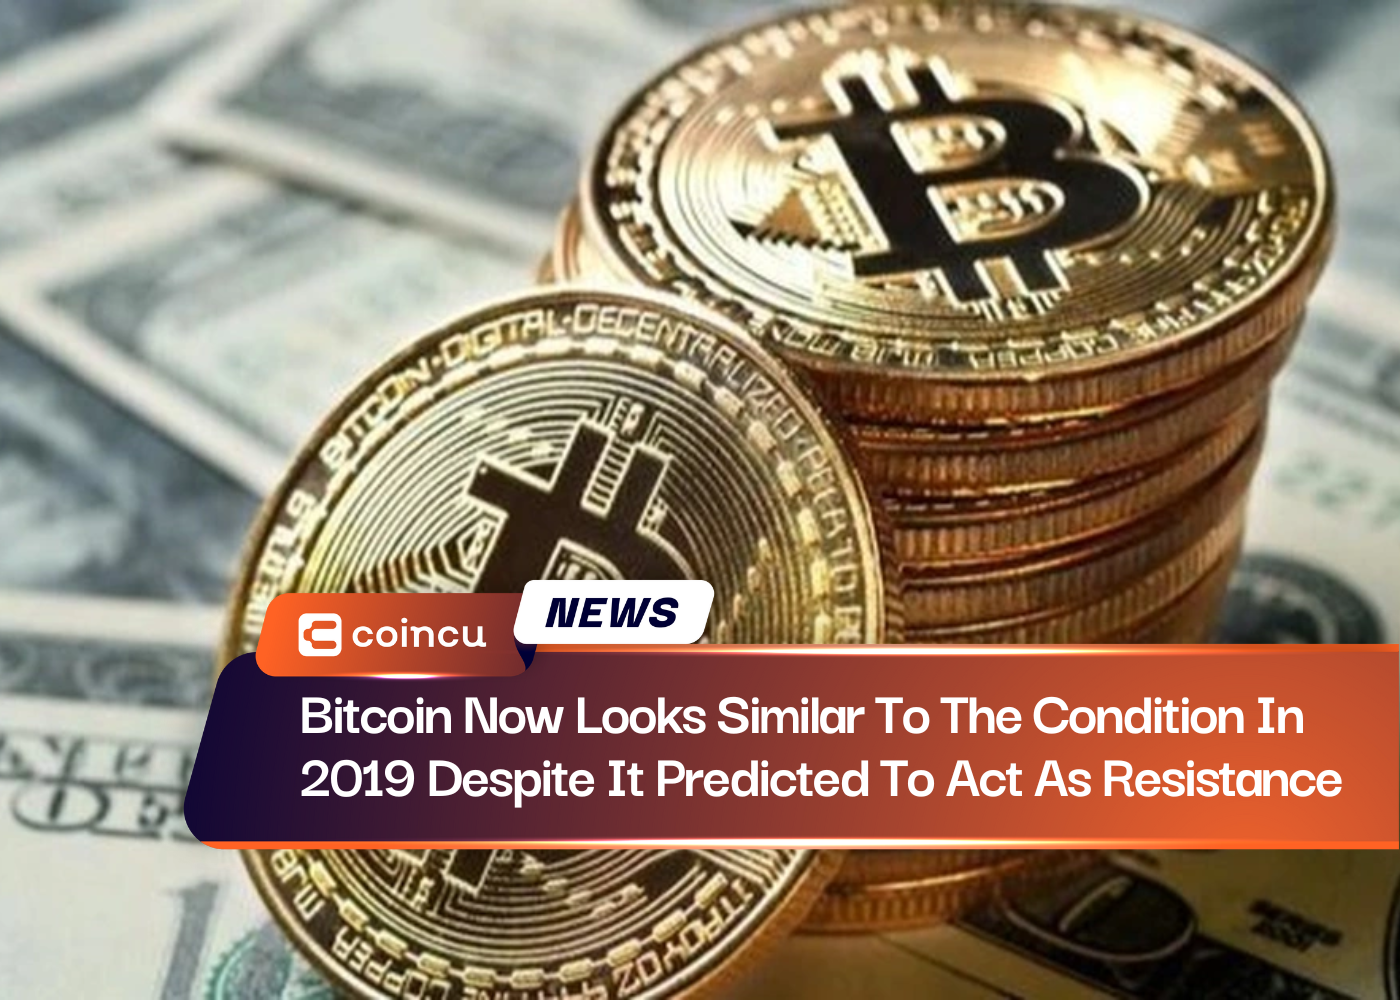 Bitcoin Now Looks Similar To The Condition In 2019 Despite It Predicted To Act As Resistance